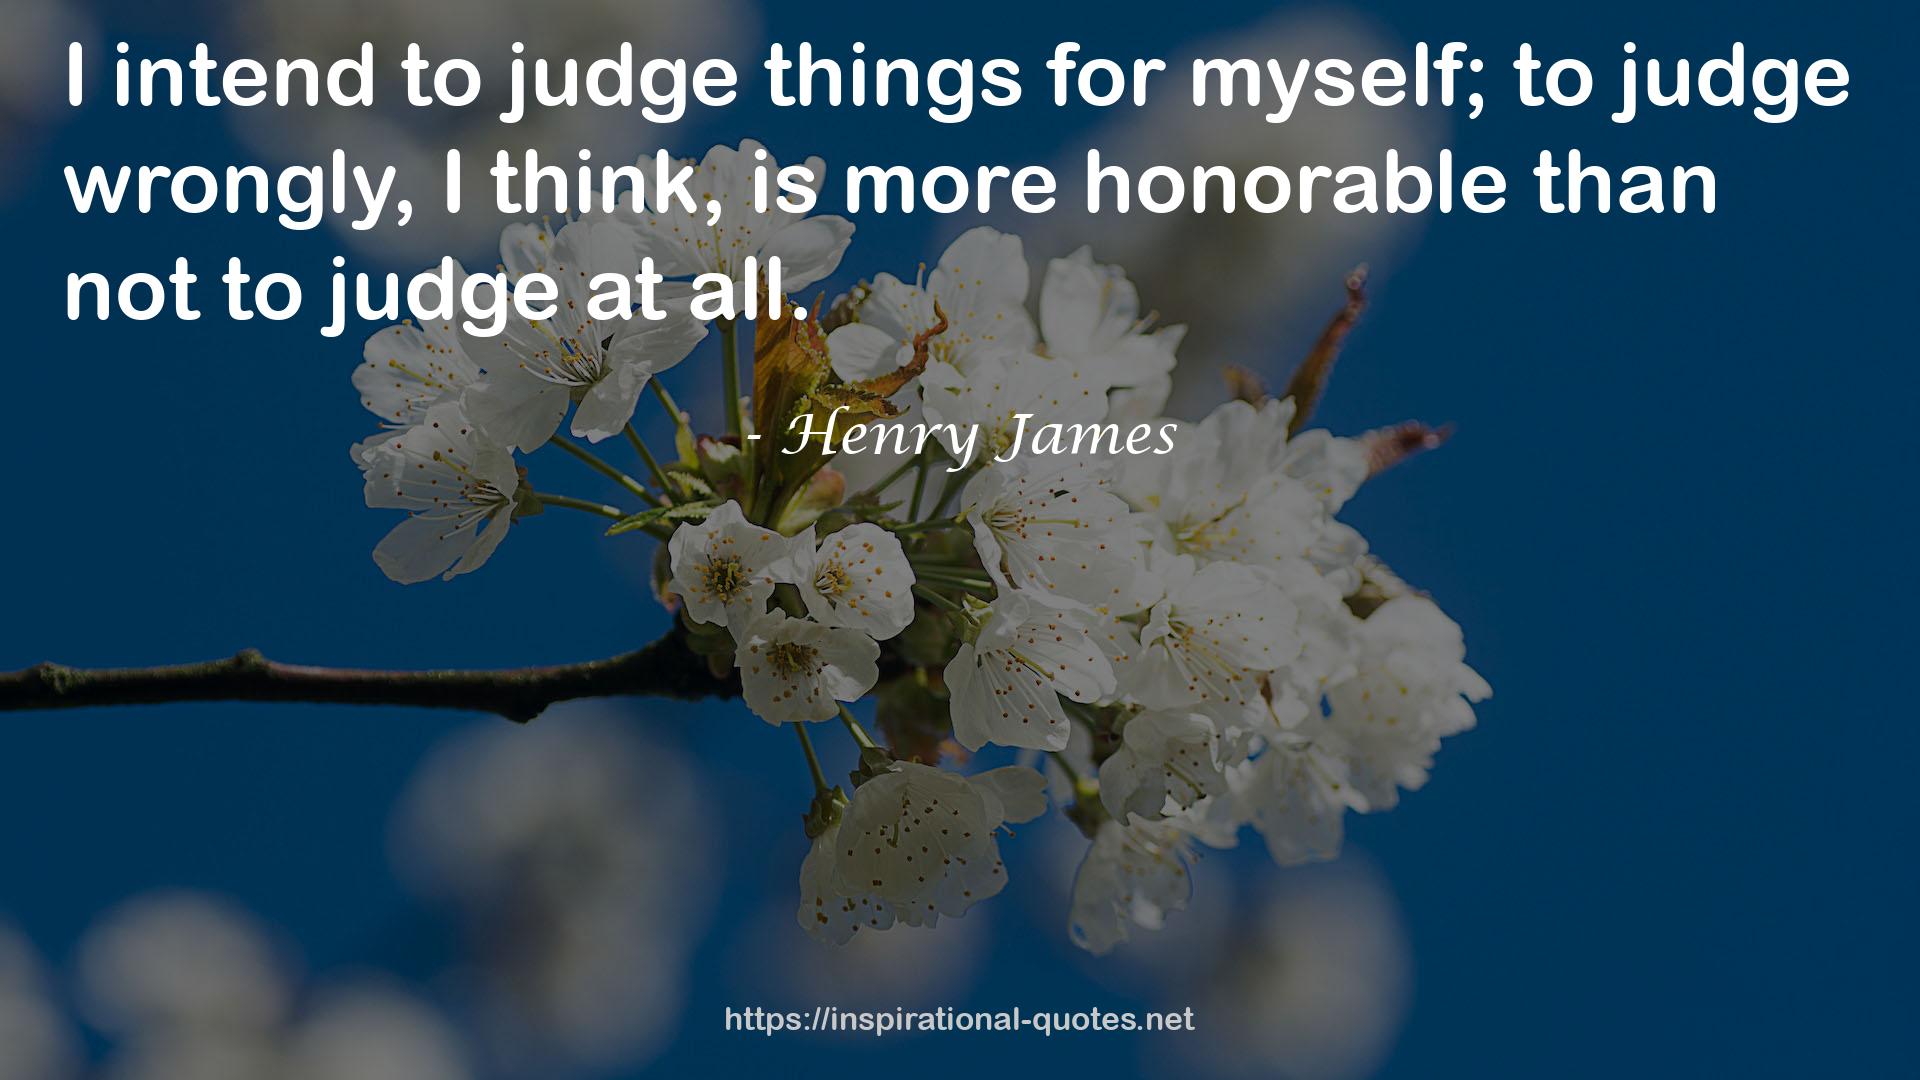 Henry James QUOTES